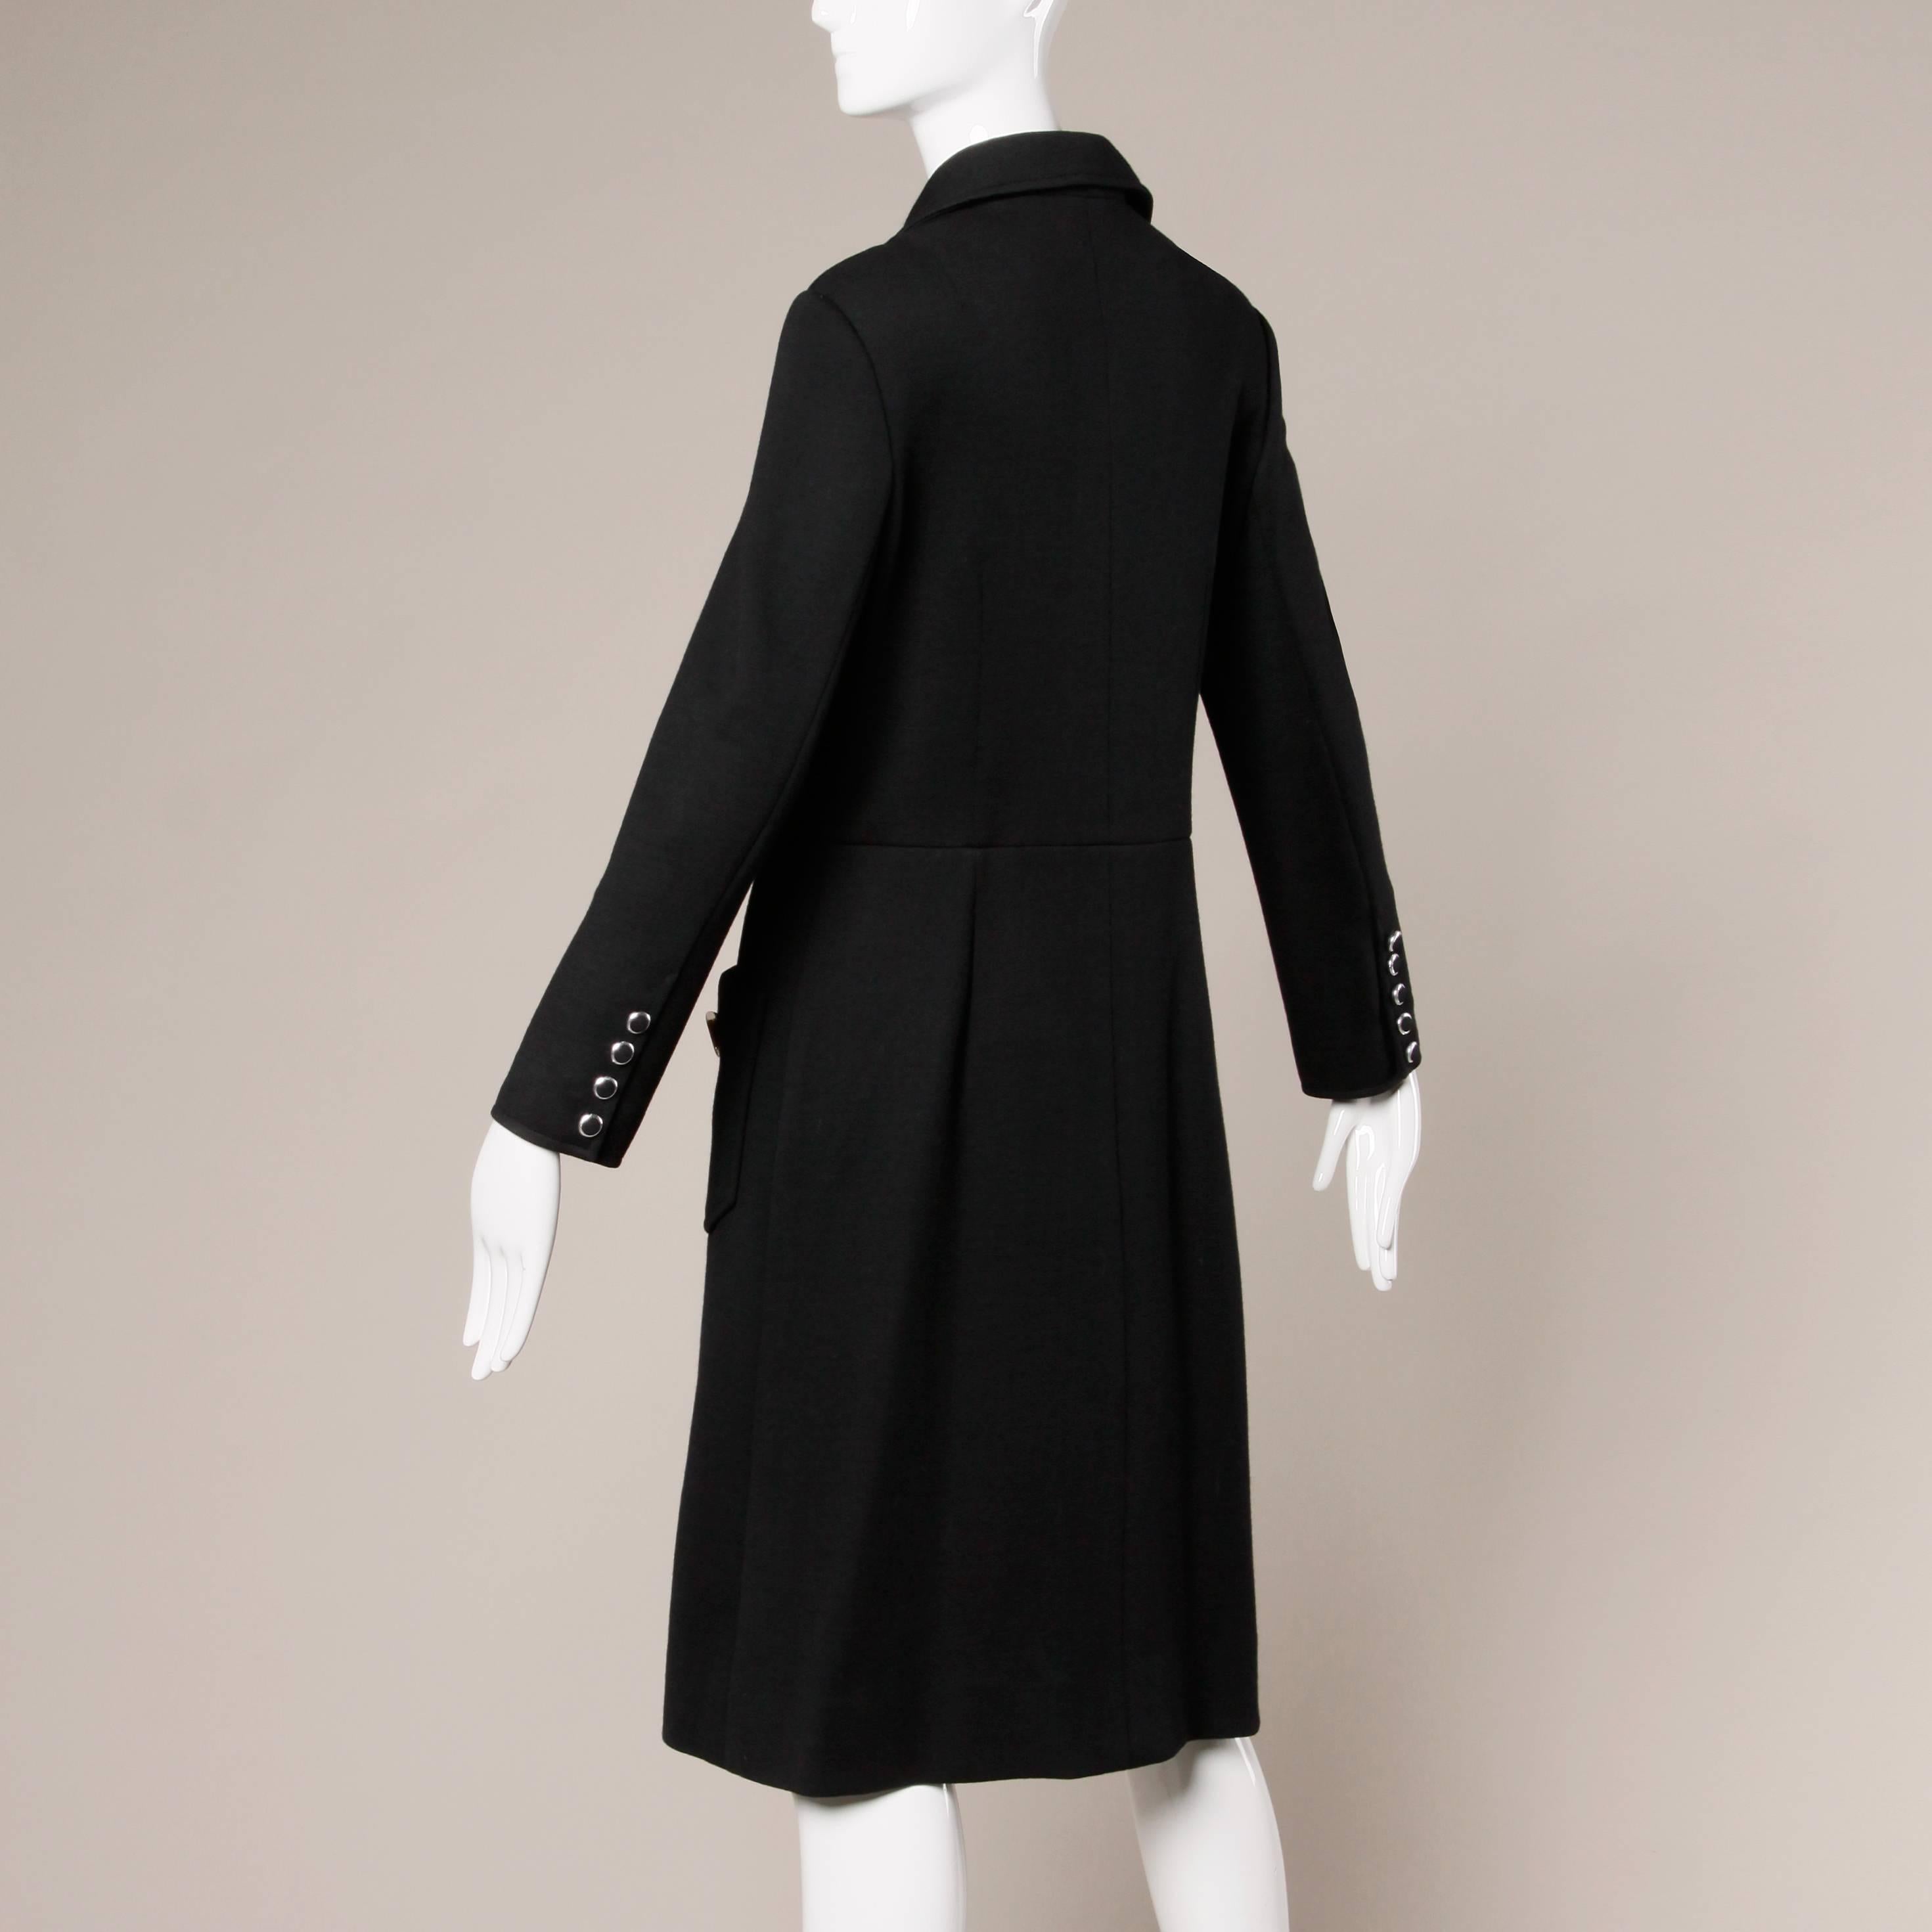 1960s Banff Ltd. by Gianni Ferri Italian Wool Coat Dress with Leather Buckles In Excellent Condition In Sparks, NV